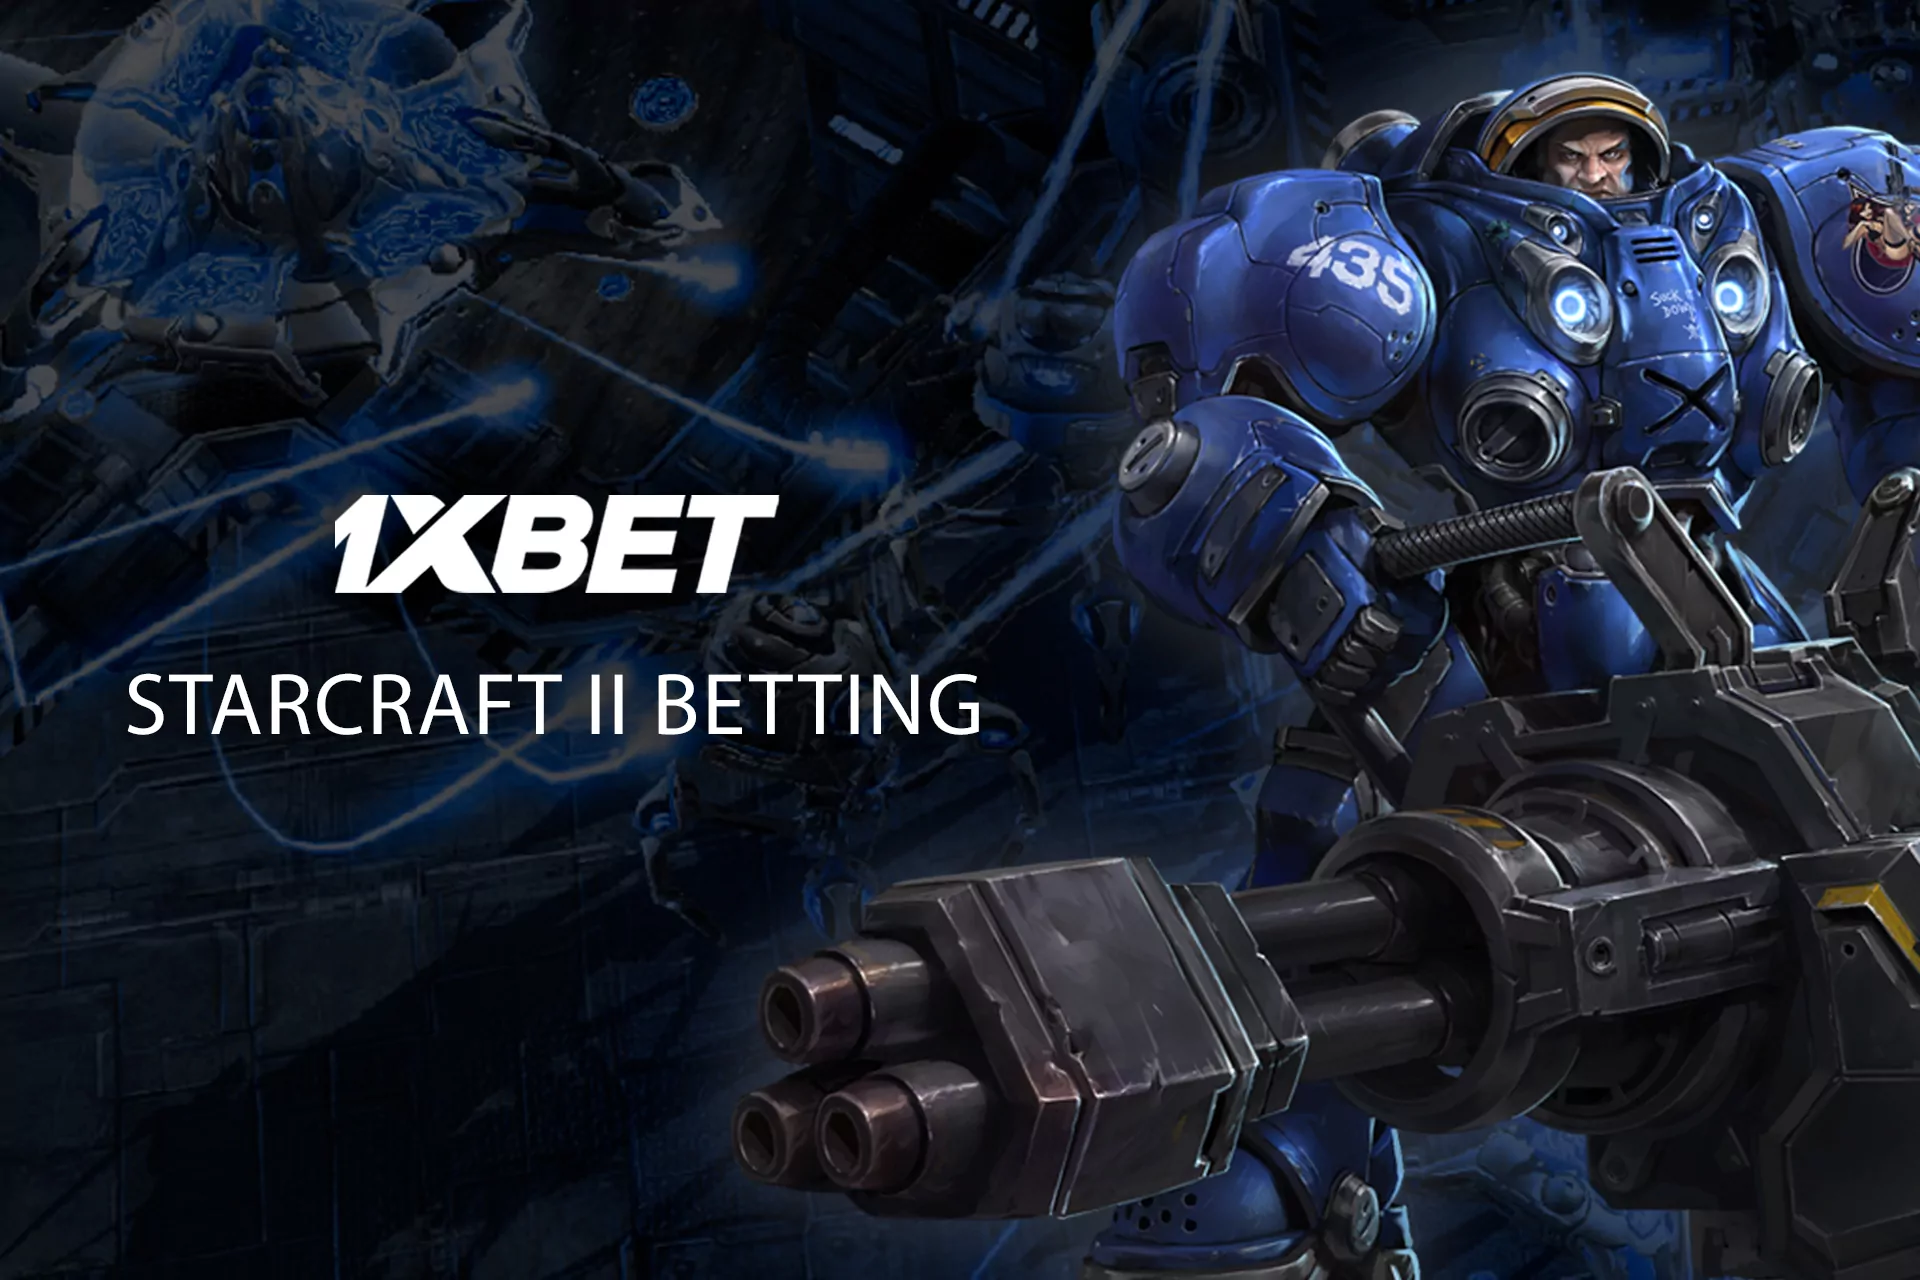 Starcraft 2 tournaments are available for betting at 1xBet.